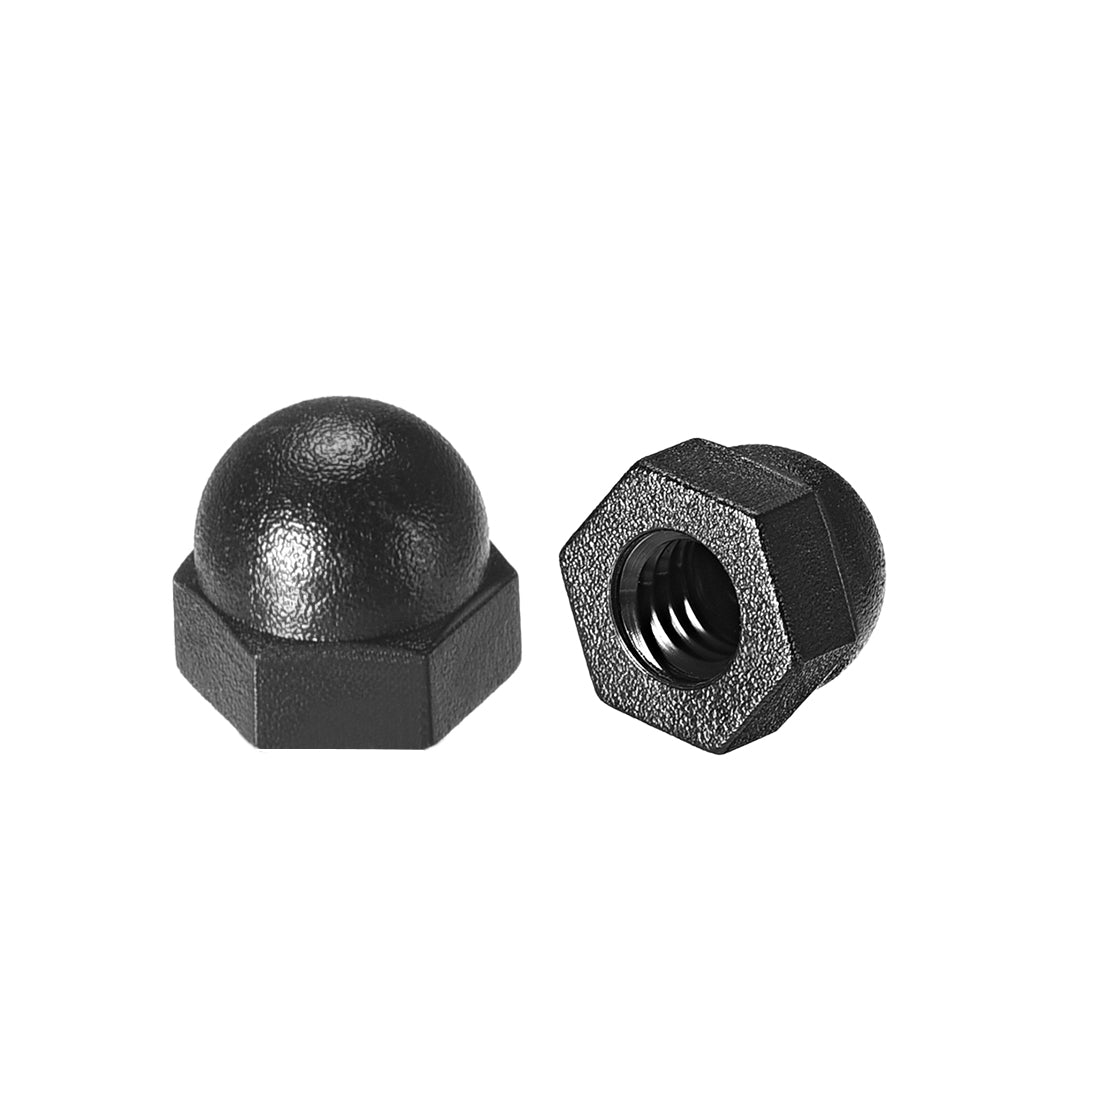 Uxcell Uxcell M3 Cap Nut, Hex Acorn Dome Head Nuts for Screws Bolts Nylon Black 20 Pcs